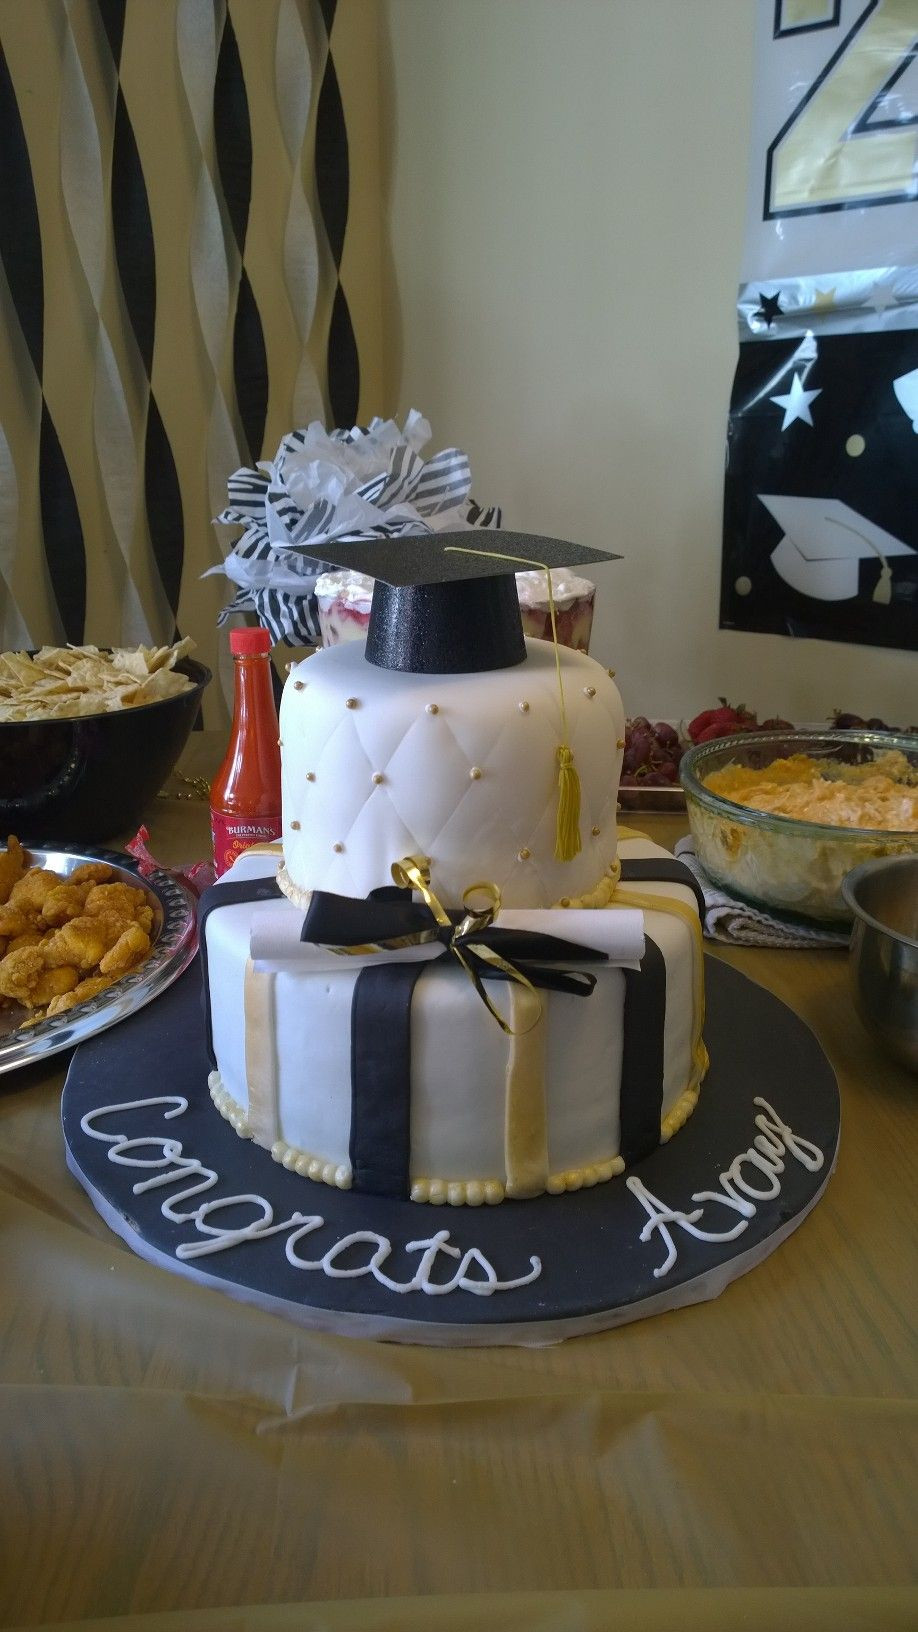 Cake Ideas For Graduation Party
 Gold and black grad cake for a dear friend s high school